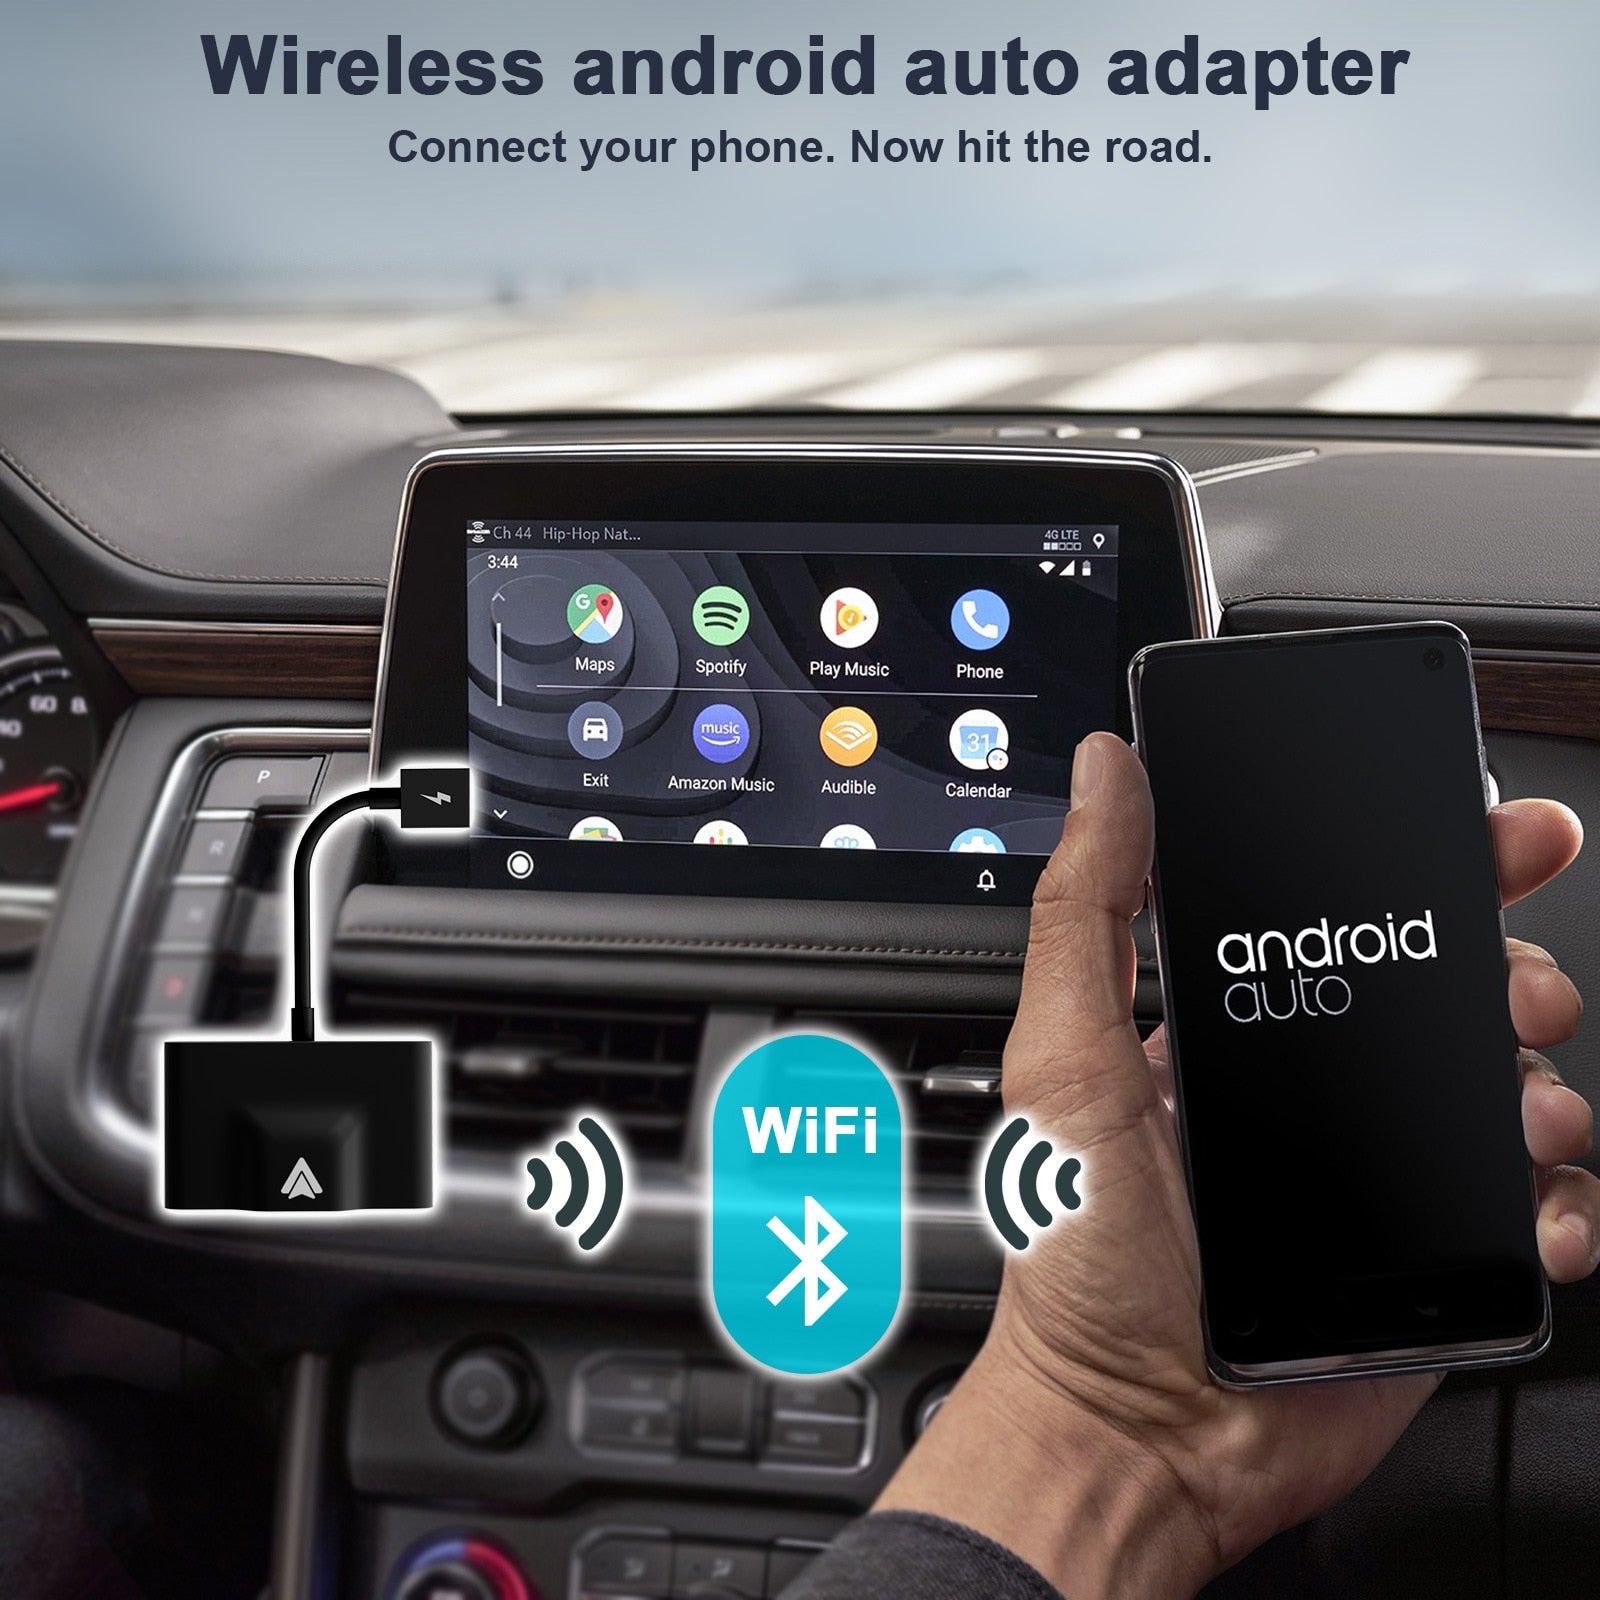 Wireless Adapter for Android Phone,Wireless Auto Car Adapter,Wireless Carplay Dongle,Plug Play 5GHz WiFi Online Update